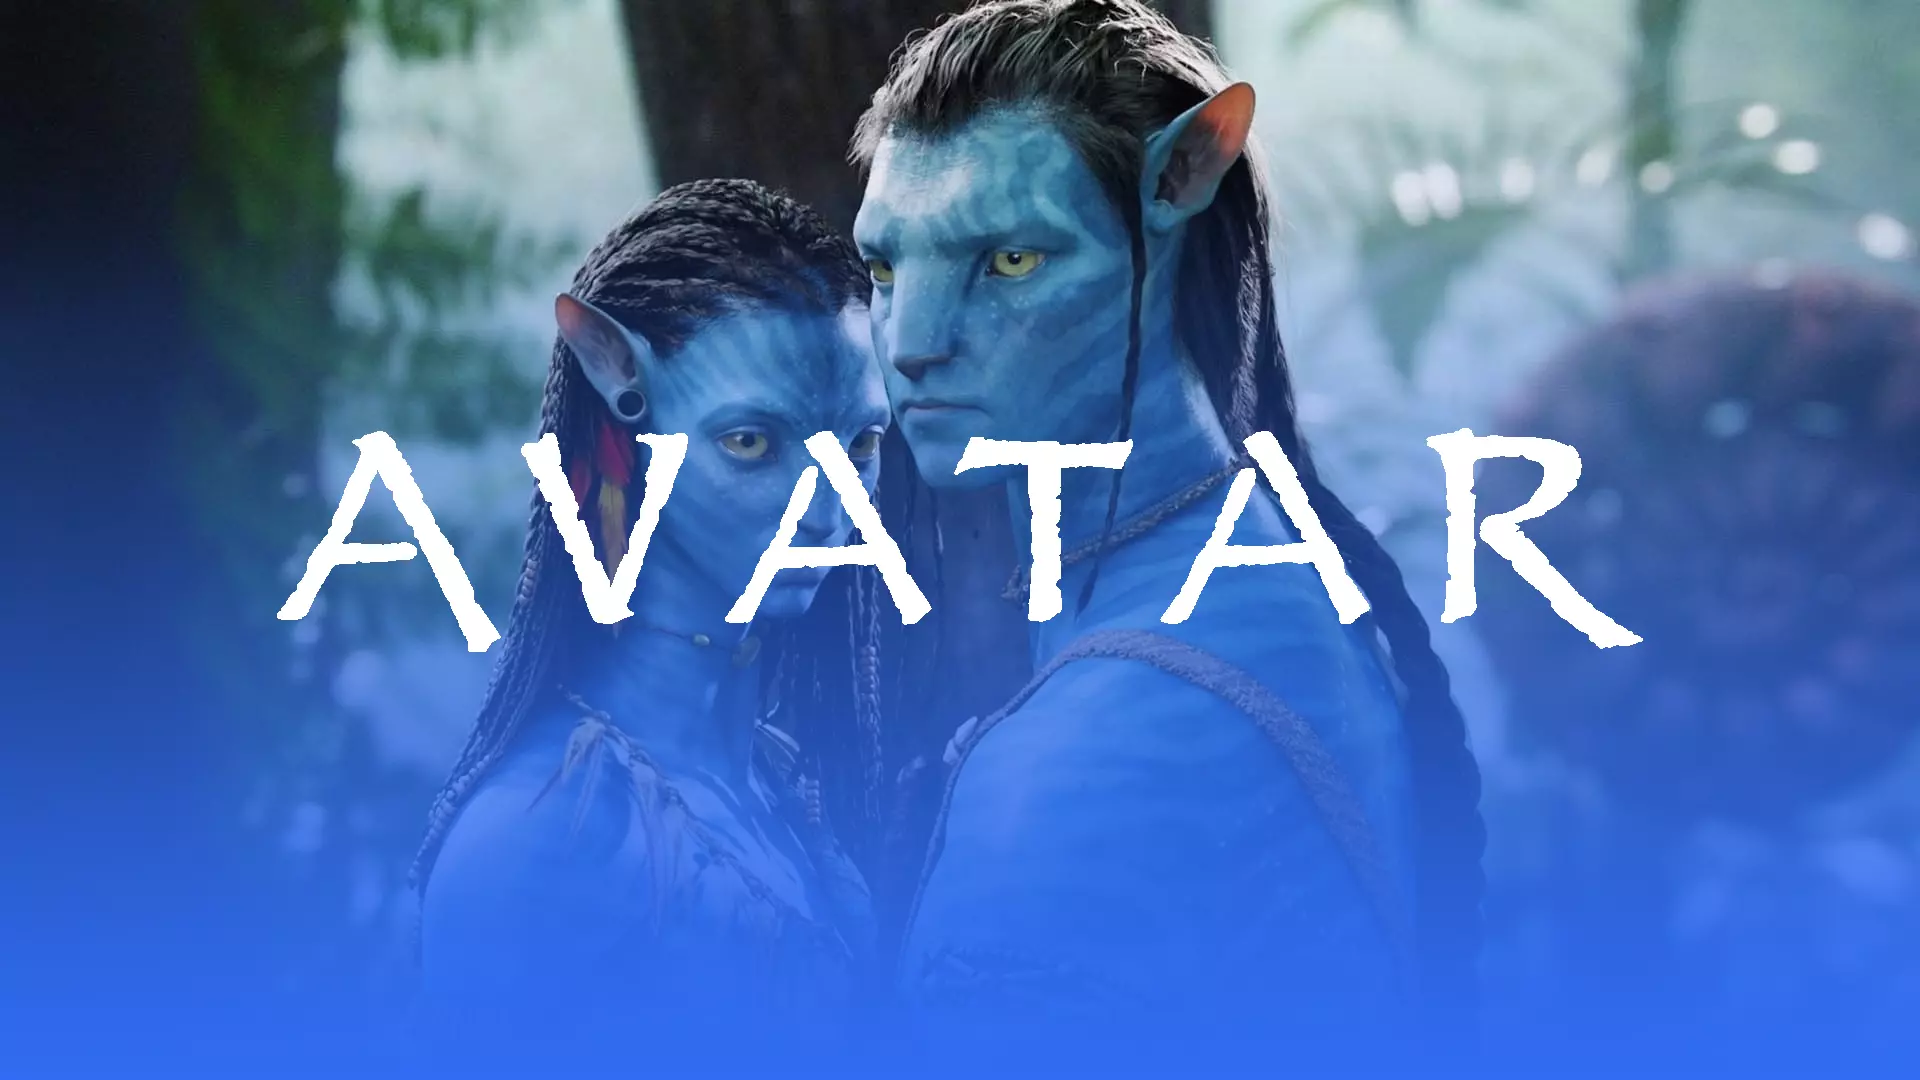 Avatar will be shown in theaters again but will be removed from Disney Plus